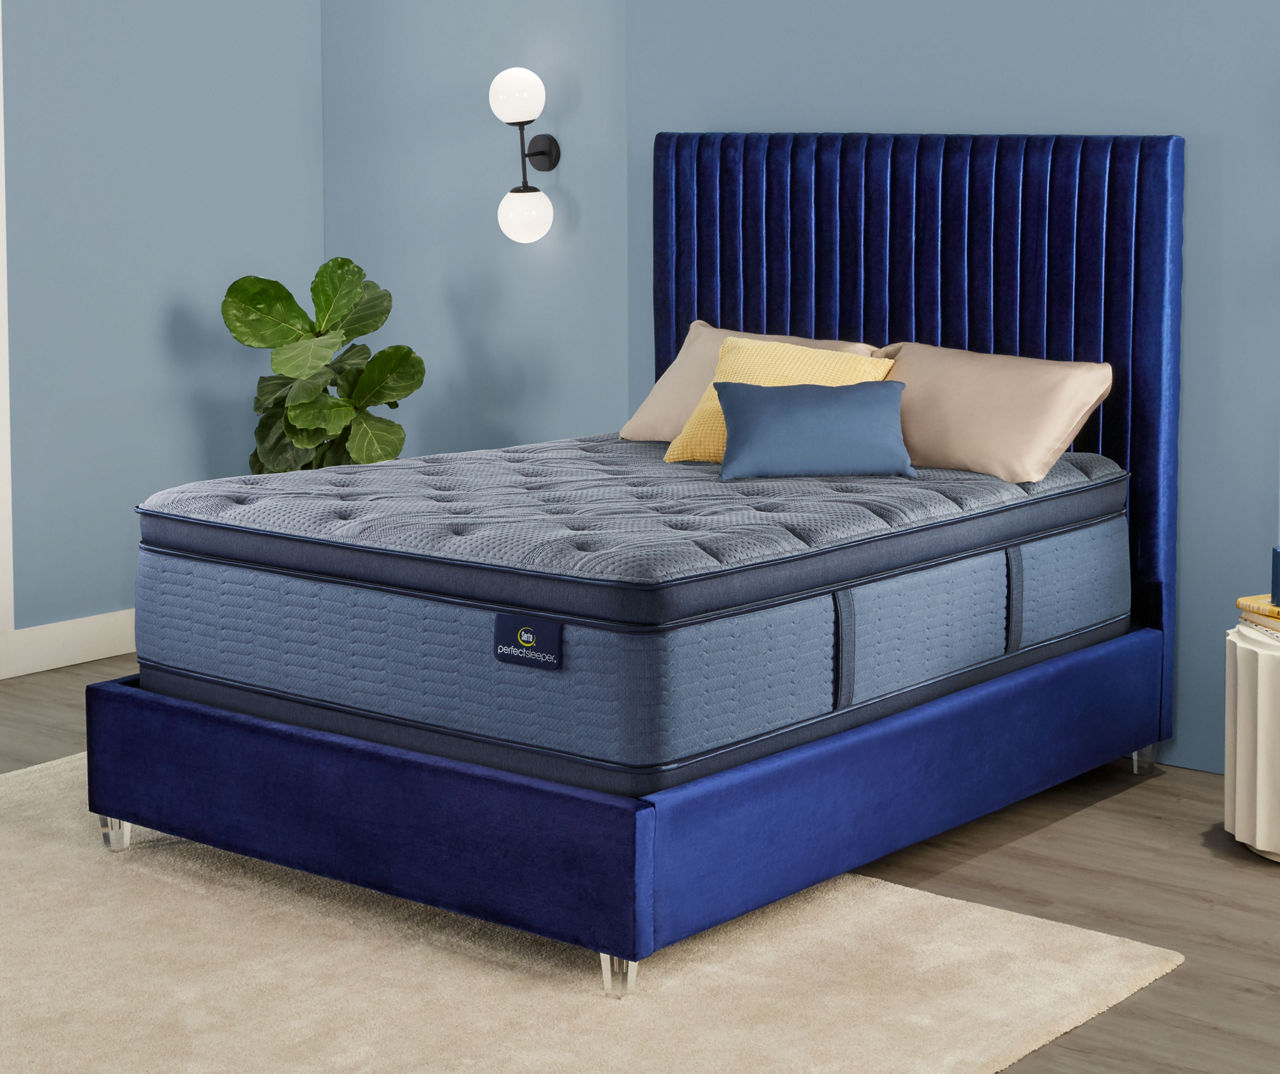 Broyhill by Serta Springdale Queen Firm Mattress & Low Profile Box Spring Set, iCollection Perfect Sleeper Pillow Top